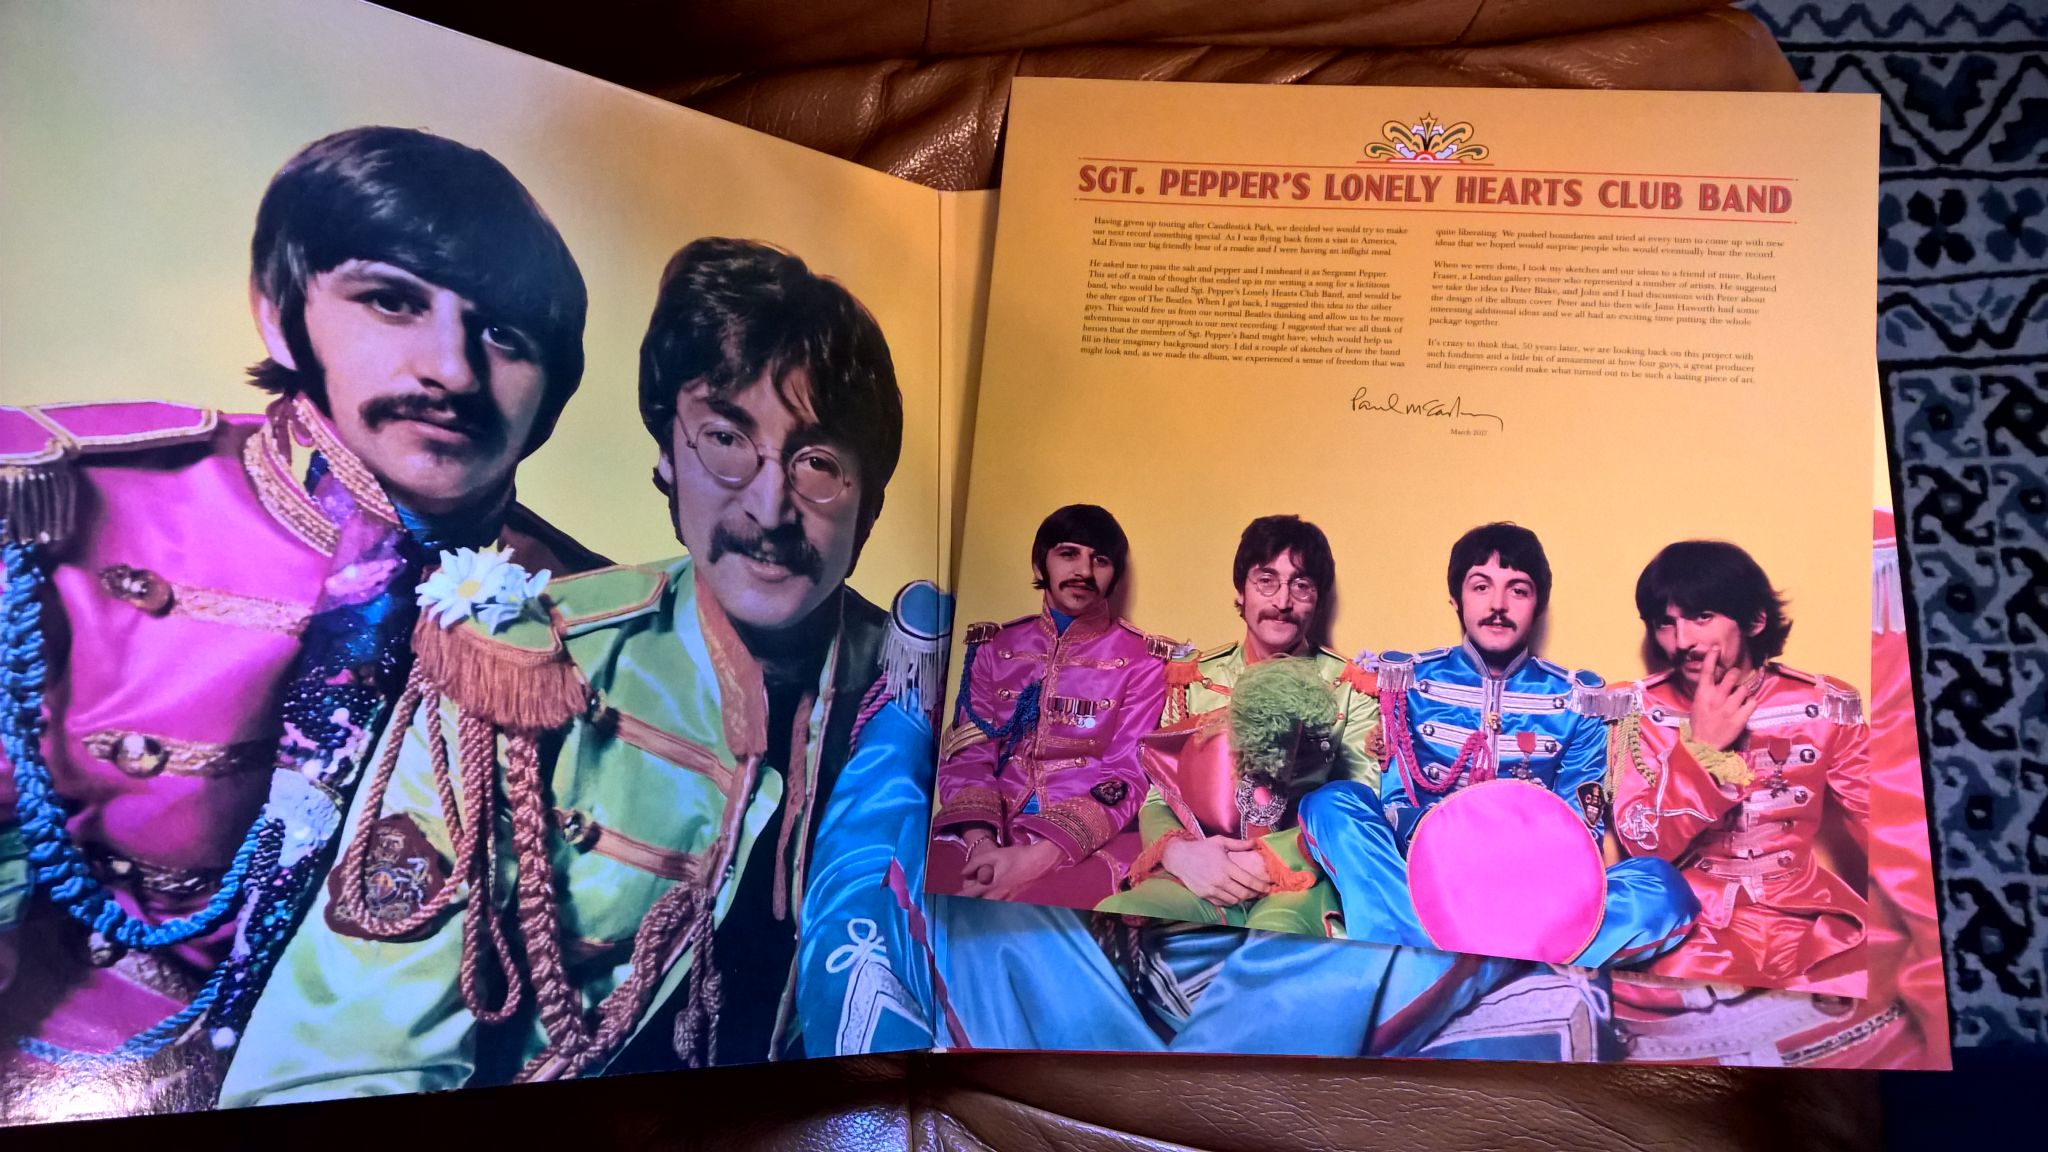 Beatles sgt pepper lonely. Sgt. Pepper's Lonely Hearts Club Band Битлз. Sgt. Pepper's Lonely Hearts Club Band the Beatles пластинка. Beatles Sgt. Pepper's Lonely Hearts Club Band (винил). Виниловая пластинка the Beatles - Sgt. Pepper's Lonely Hearts Club Band (reissue, stereo, Gatefold).